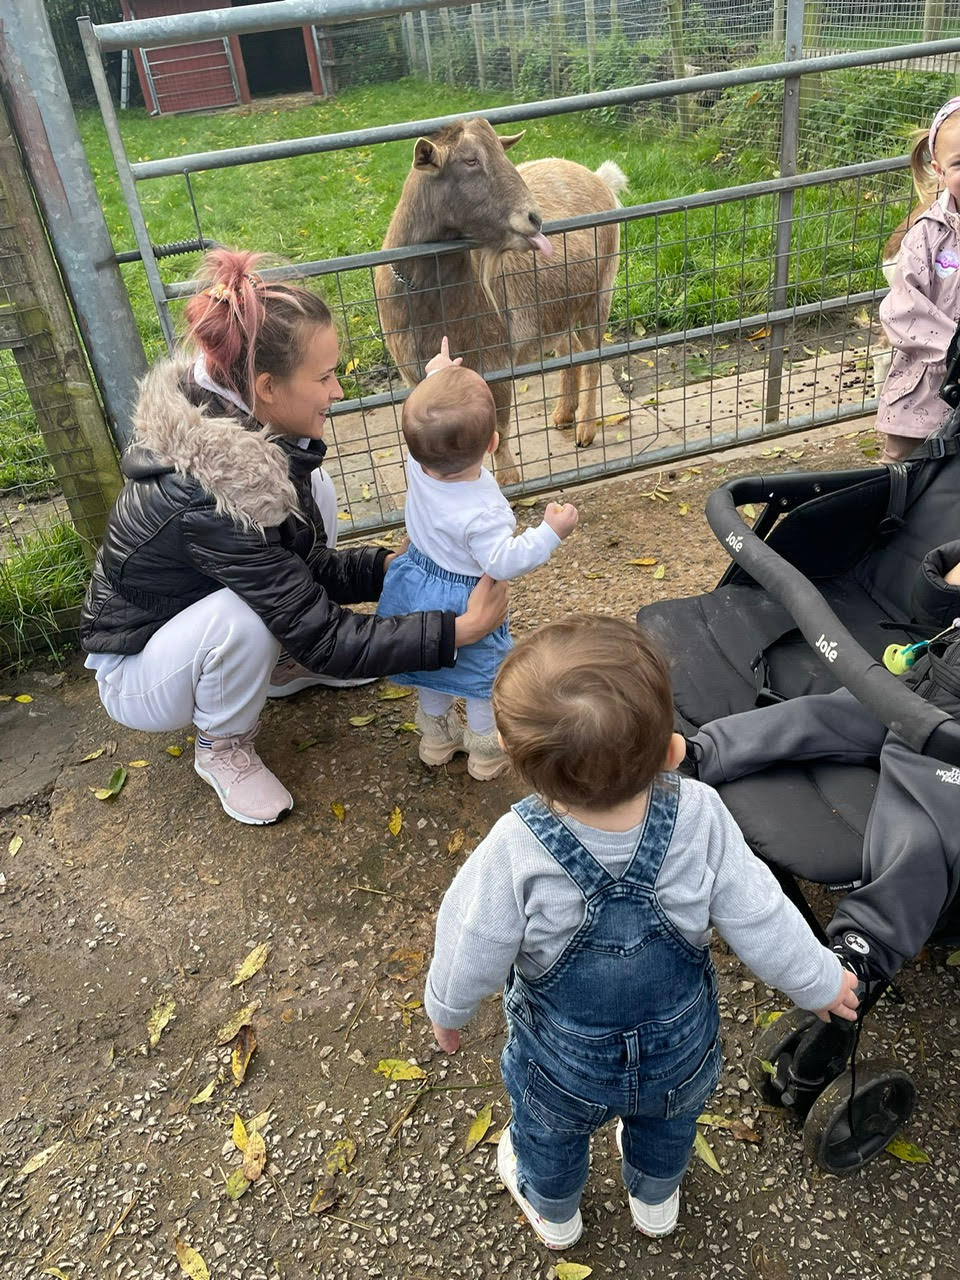 A mother and her children looking at a goat at a farm as part of a Venus Charity initiative.